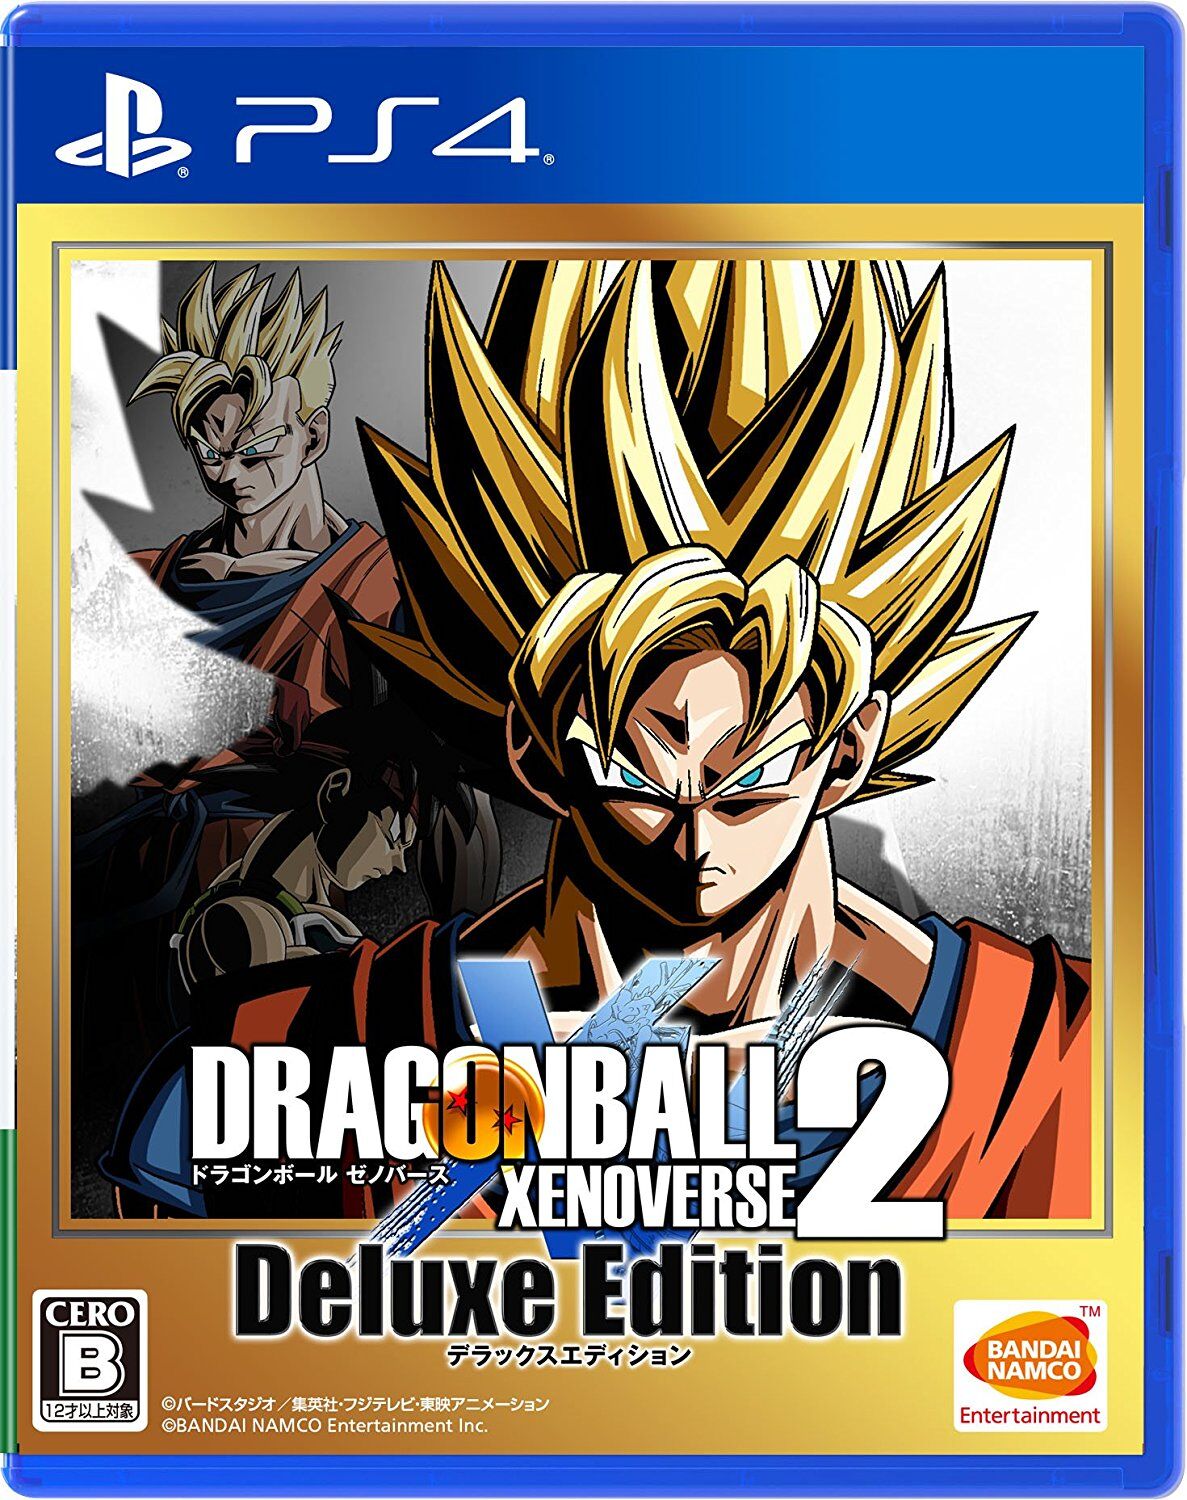 Dragon Ball Xenoverse 2 First DLC Pack & Bonus Free Content Coming In  December